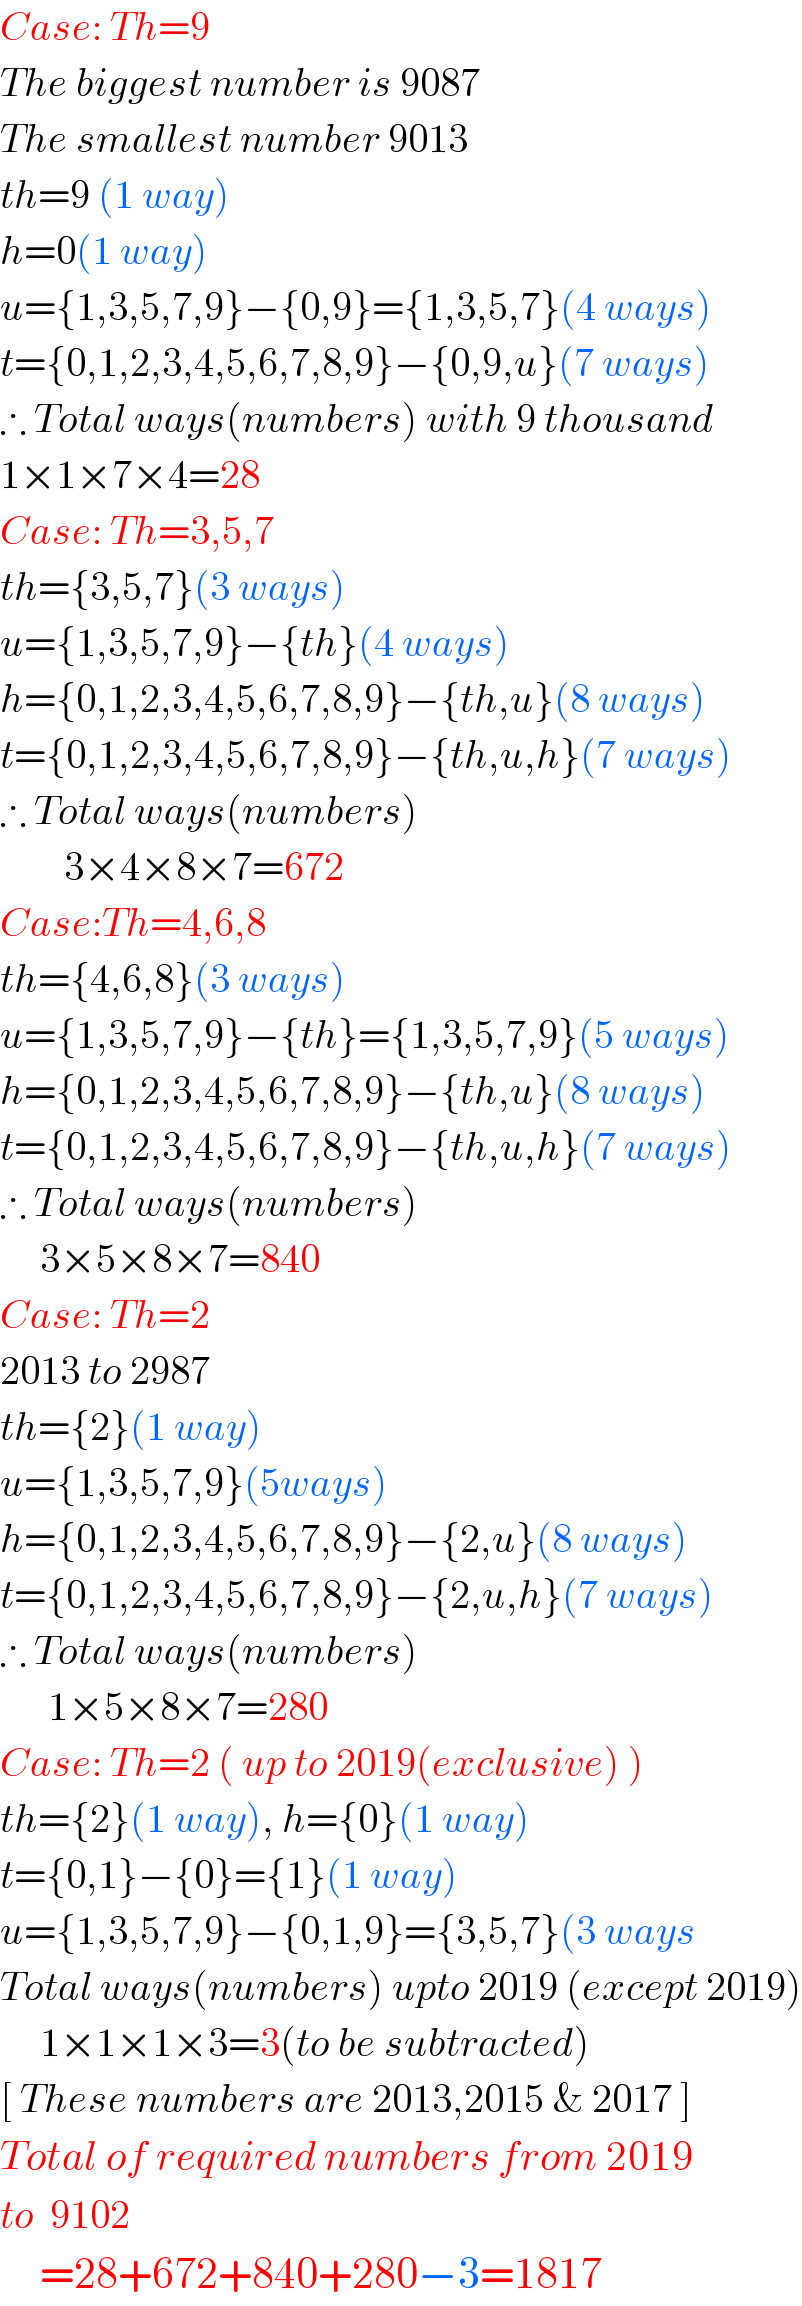 Case: Th=9  The biggest number is 9087  The smallest number 9013  th=9 (1 way)  h=0(1 way)  u={1,3,5,7,9}−{0,9}={1,3,5,7}(4 ways)  t={0,1,2,3,4,5,6,7,8,9}−{0,9,u}(7 ways)  ∴ Total ways(numbers) with 9 thousand  1×1×7×4=28  Case: Th=3,5,7  th={3,5,7}(3 ways)  u={1,3,5,7,9}−{th}(4 ways)  h={0,1,2,3,4,5,6,7,8,9}−{th,u}(8 ways)  t={0,1,2,3,4,5,6,7,8,9}−{th,u,h}(7 ways)  ∴ Total ways(numbers)          3×4×8×7=672  Case:Th=4,6,8  th={4,6,8}(3 ways)  u={1,3,5,7,9}−{th}={1,3,5,7,9}(5 ways)  h={0,1,2,3,4,5,6,7,8,9}−{th,u}(8 ways)  t={0,1,2,3,4,5,6,7,8,9}−{th,u,h}(7 ways)  ∴ Total ways(numbers)       3×5×8×7=840  Case: Th=2  2013 to 2987  th={2}(1 way)  u={1,3,5,7,9}(5ways)  h={0,1,2,3,4,5,6,7,8,9}−{2,u}(8 ways)  t={0,1,2,3,4,5,6,7,8,9}−{2,u,h}(7 ways)  ∴ Total ways(numbers)        1×5×8×7=280  Case: Th=2 ( up to 2019(exclusive) )  th={2}(1 way), h={0}(1 way)  t={0,1}−{0}={1}(1 way)  u={1,3,5,7,9}−{0,1,9}={3,5,7}(3 ways  Total ways(numbers) upto 2019 (except 2019)       1×1×1×3=3(to be subtracted)  [ These numbers are 2013,2015 & 2017 ]  Total of required numbers from 2019  to  9102        =28+672+840+280−3=1817  